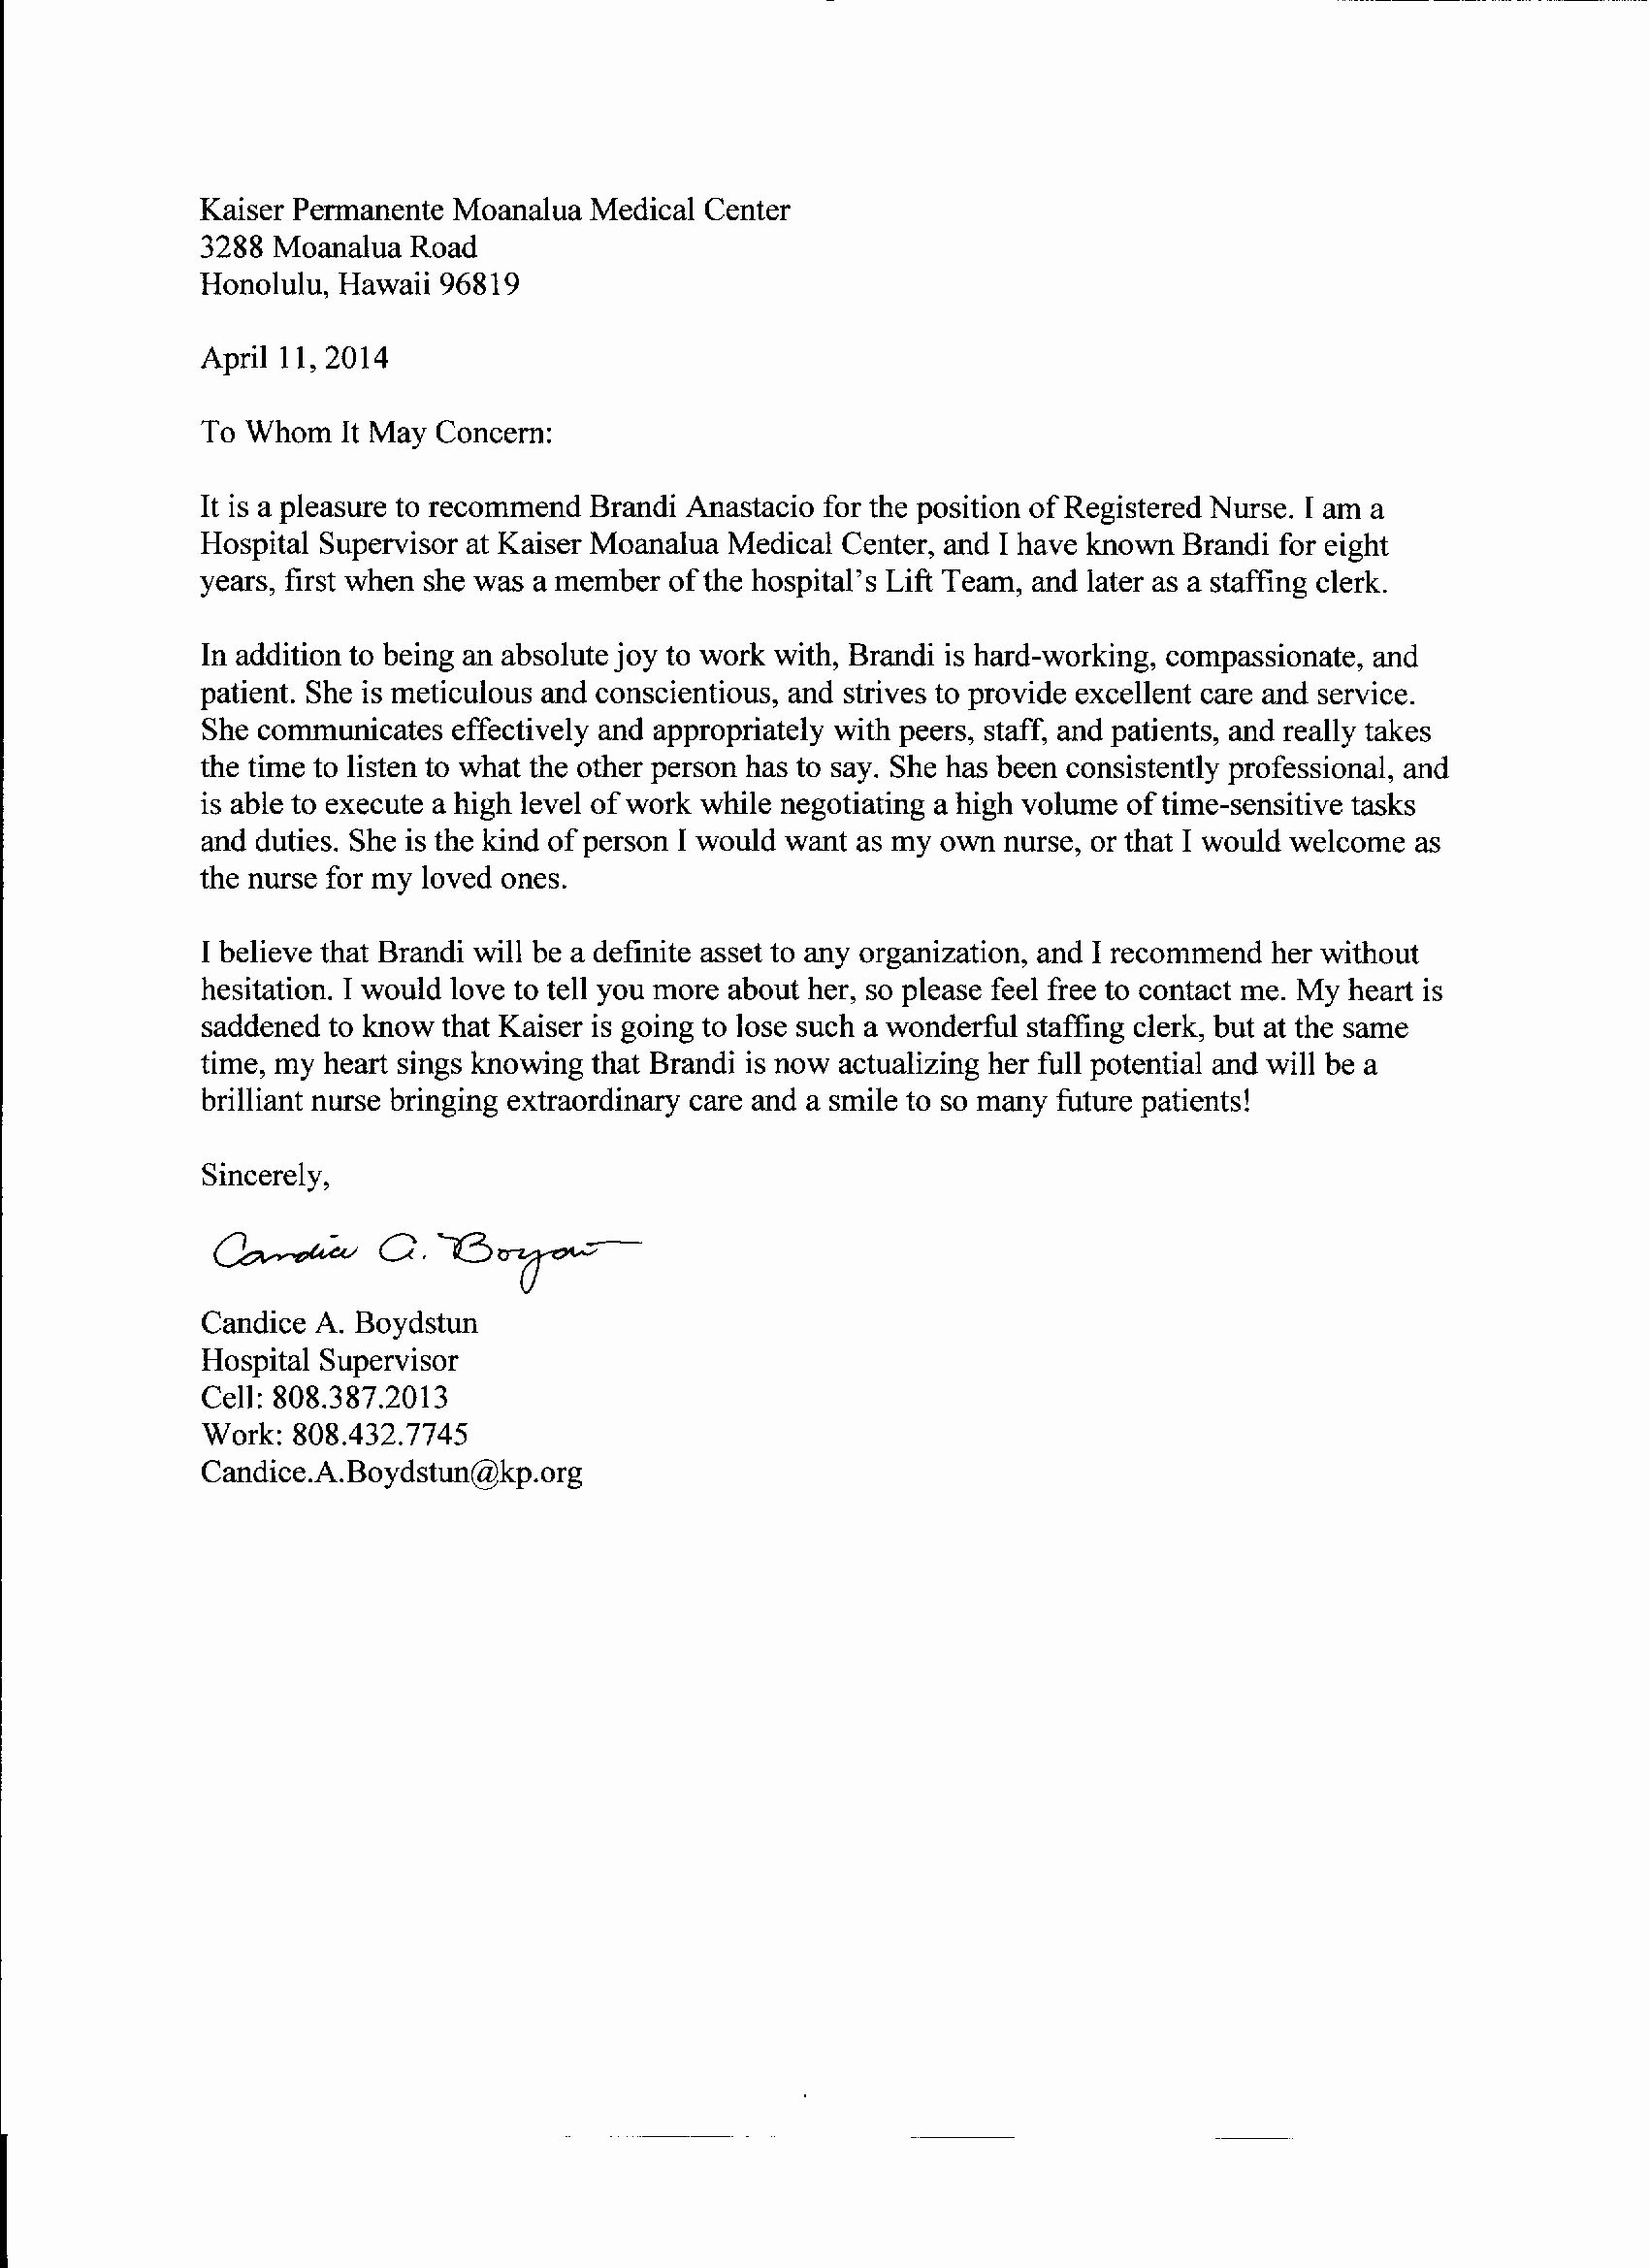 Reference Letter for Nursing School Awesome Letters Of Re Mendation Brandi Nicole M Anastacio